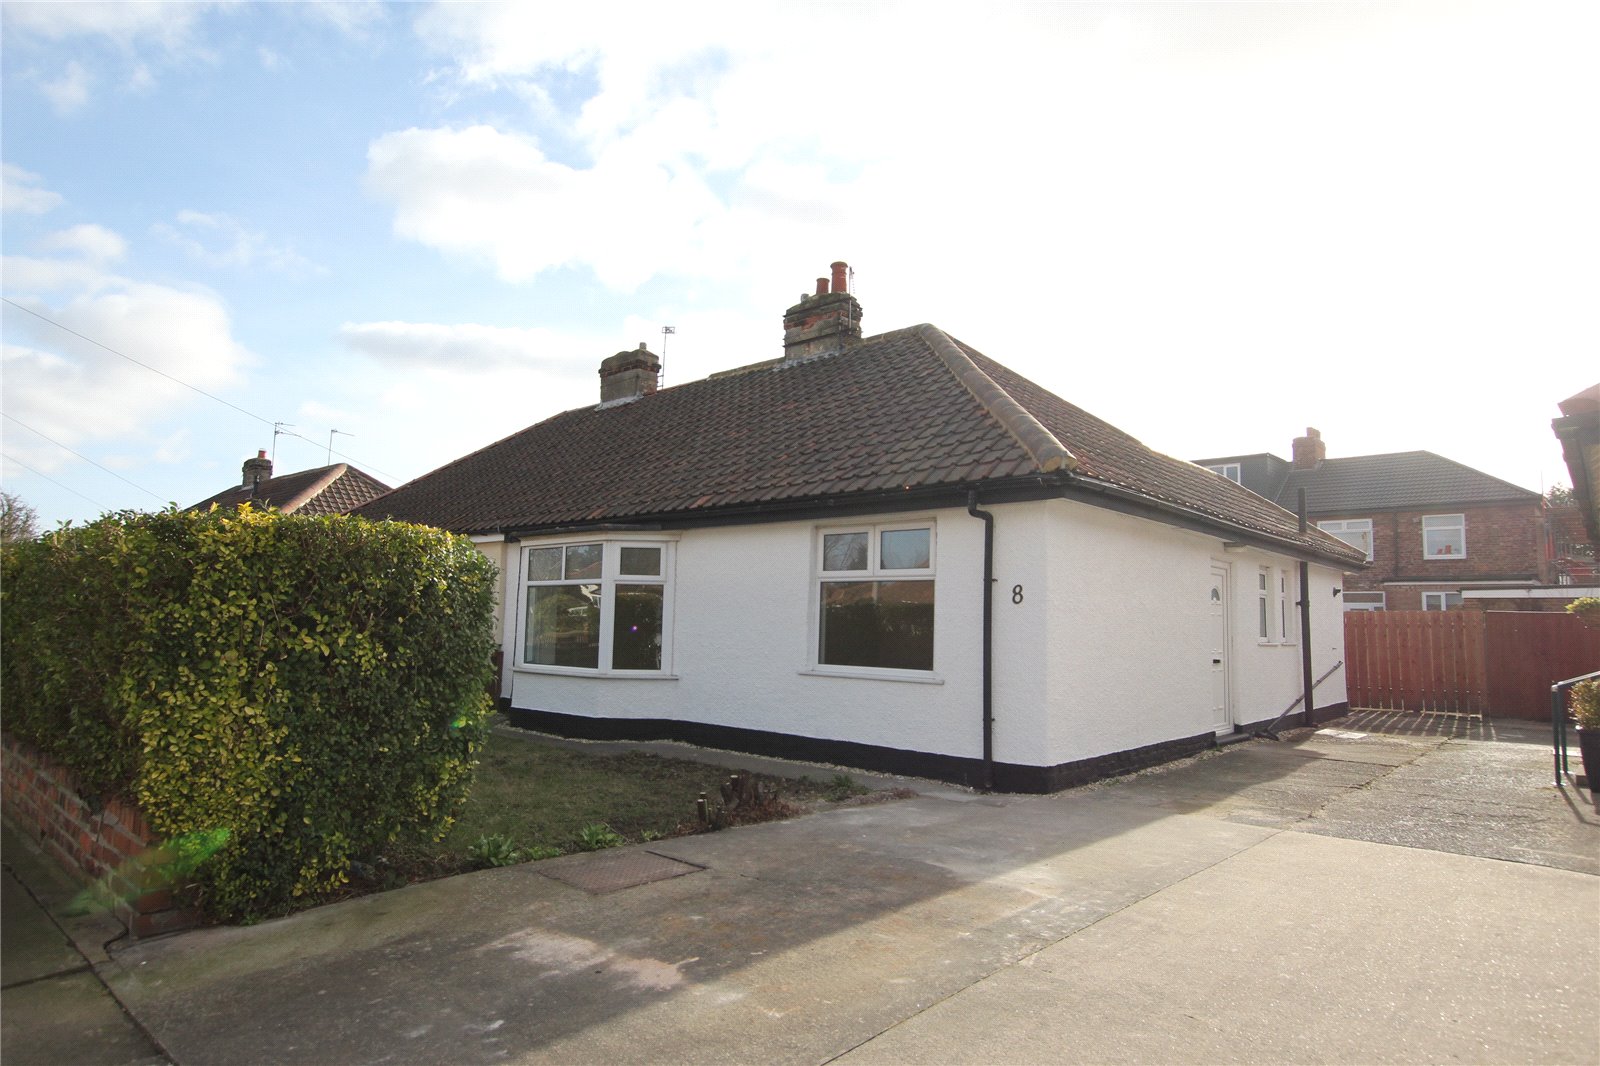 3 bed bungalow to rent - Property Image 1